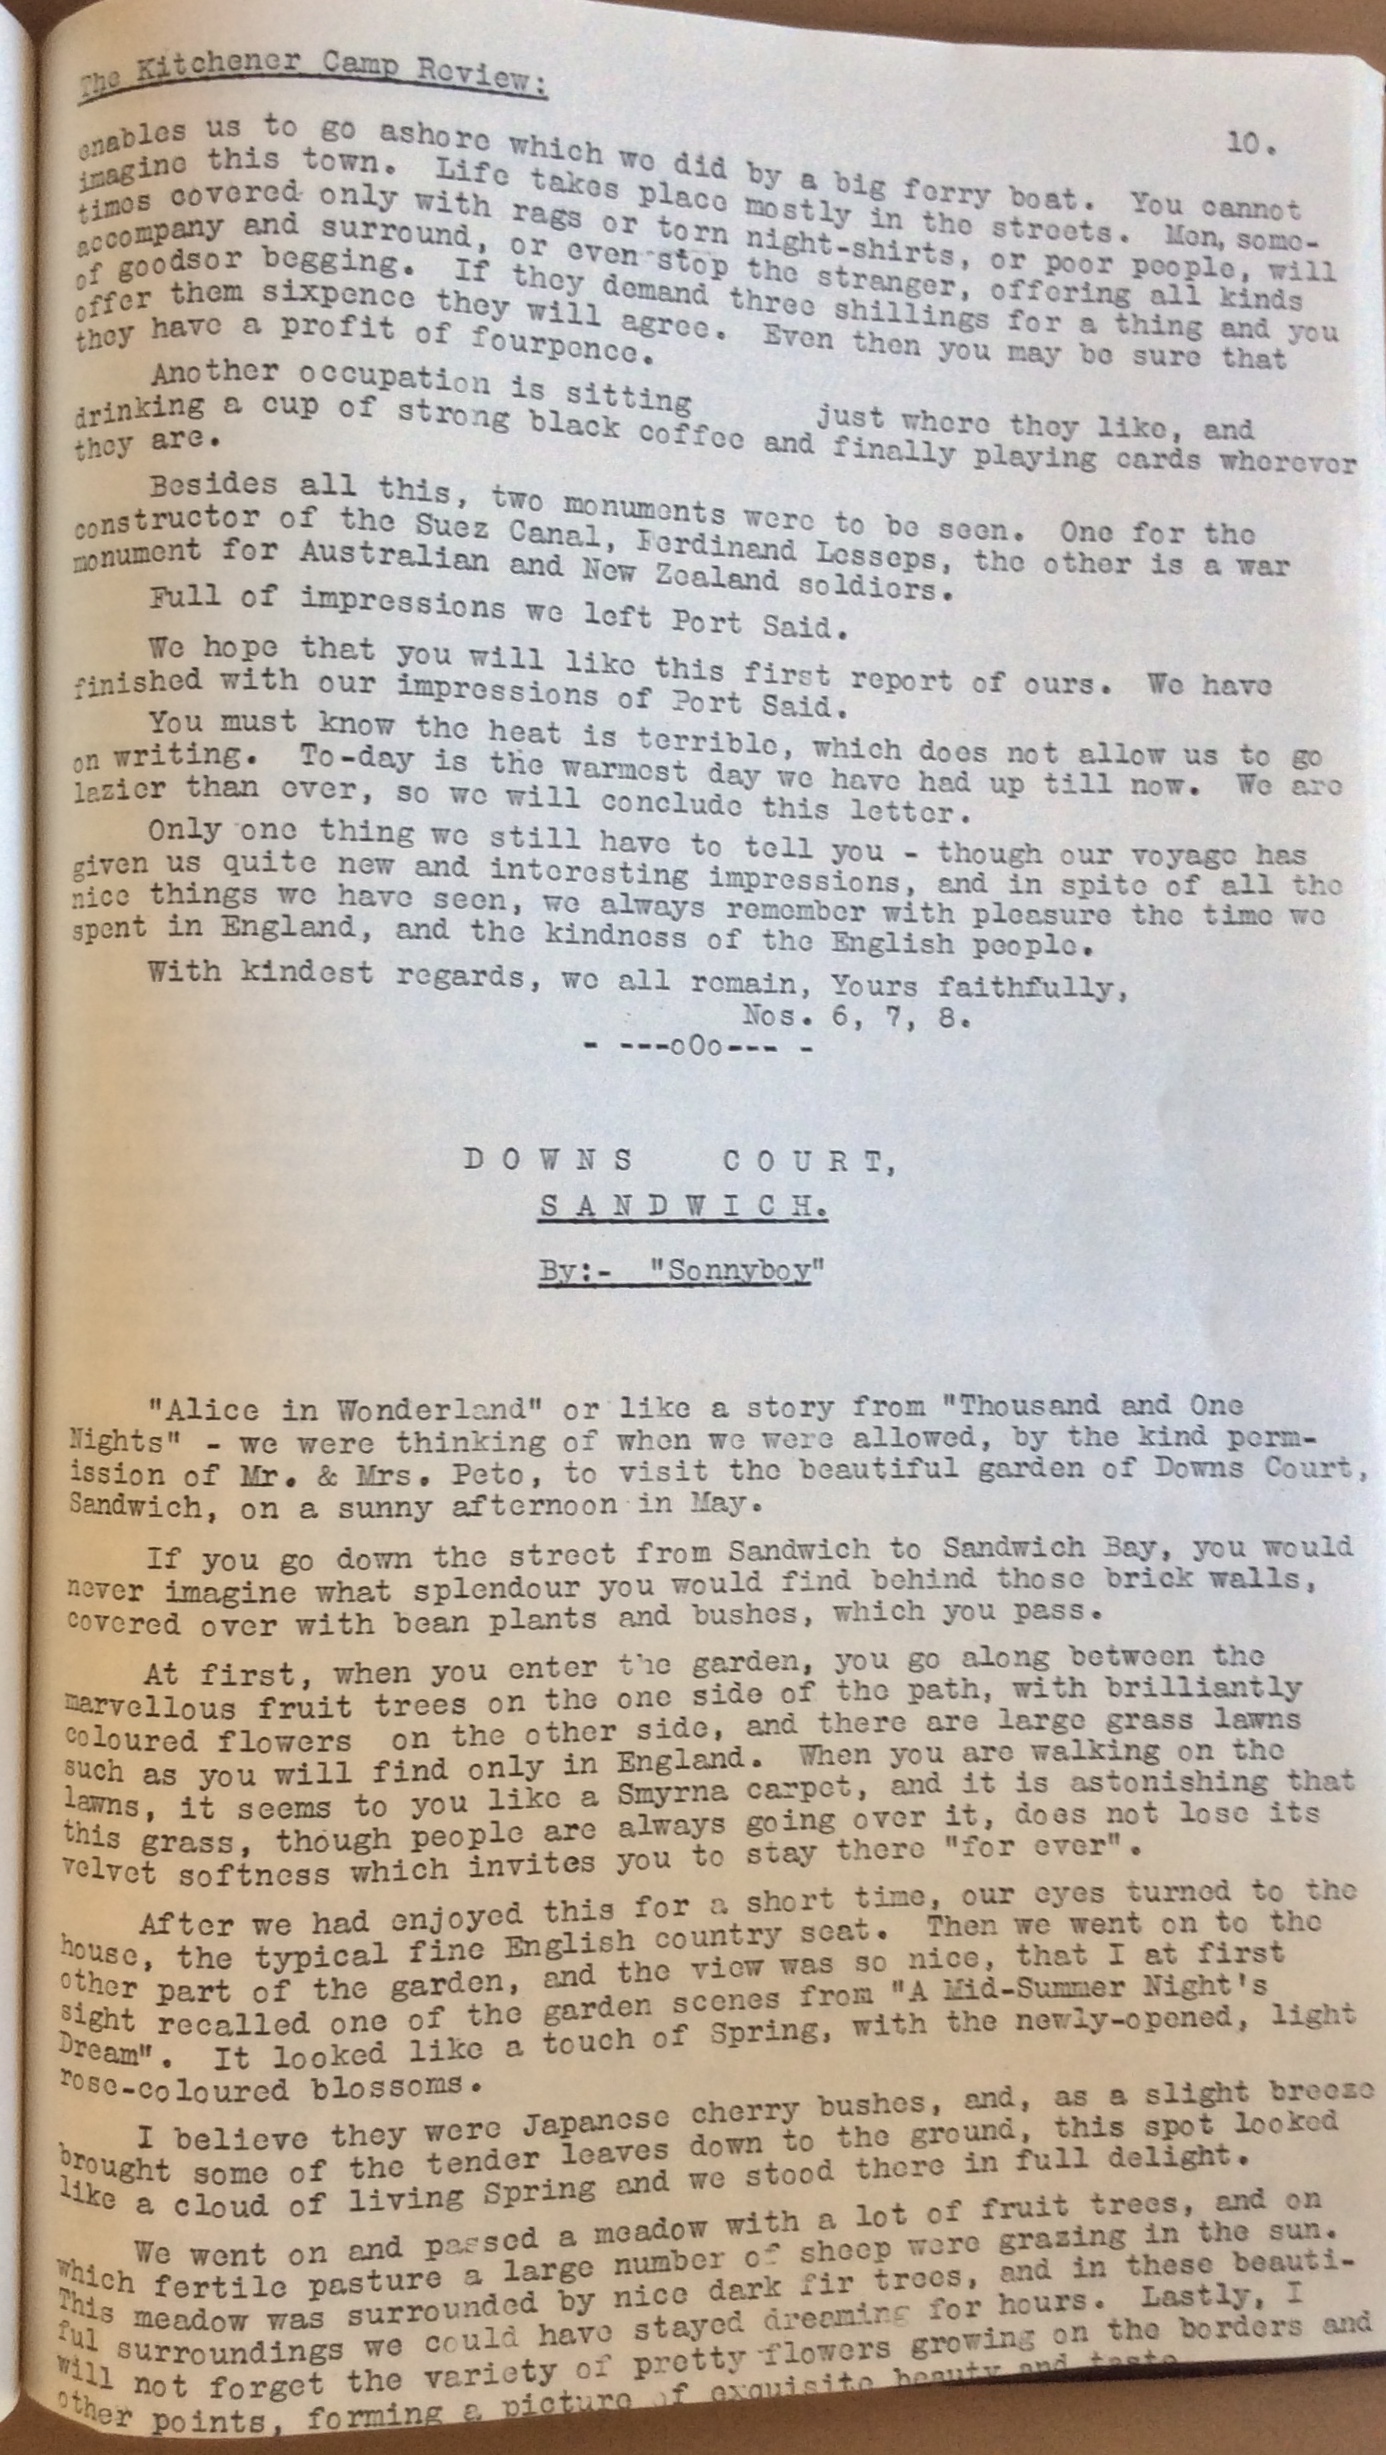 The Kitchener Camp Review, July 1939, No. 5, page 10